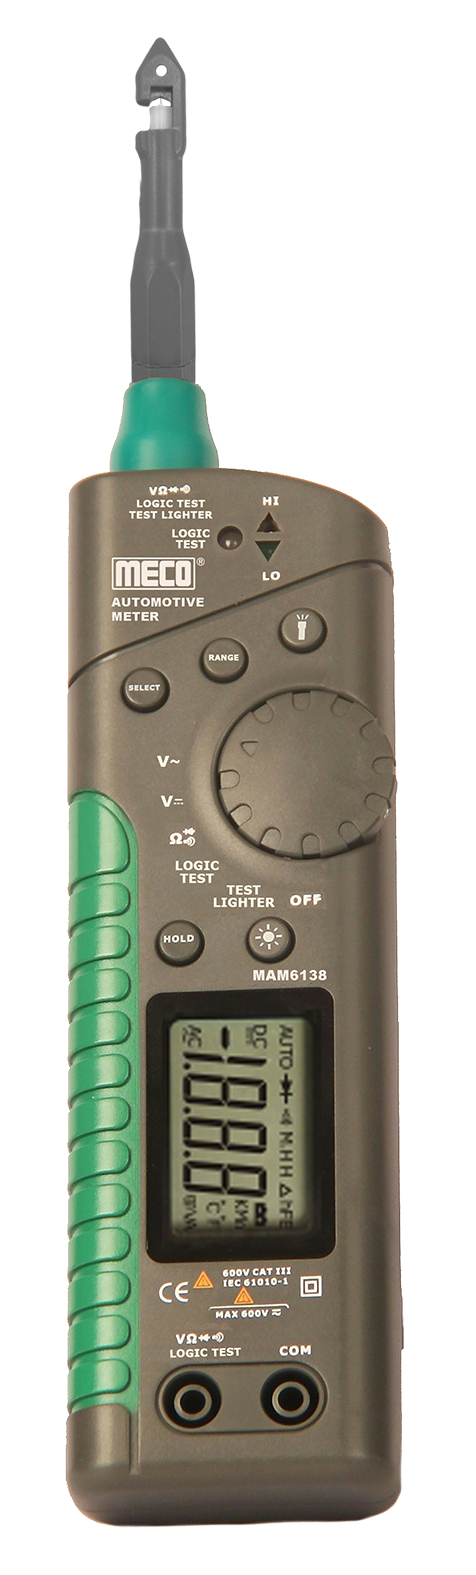 MECO instruments launches an automotive meter